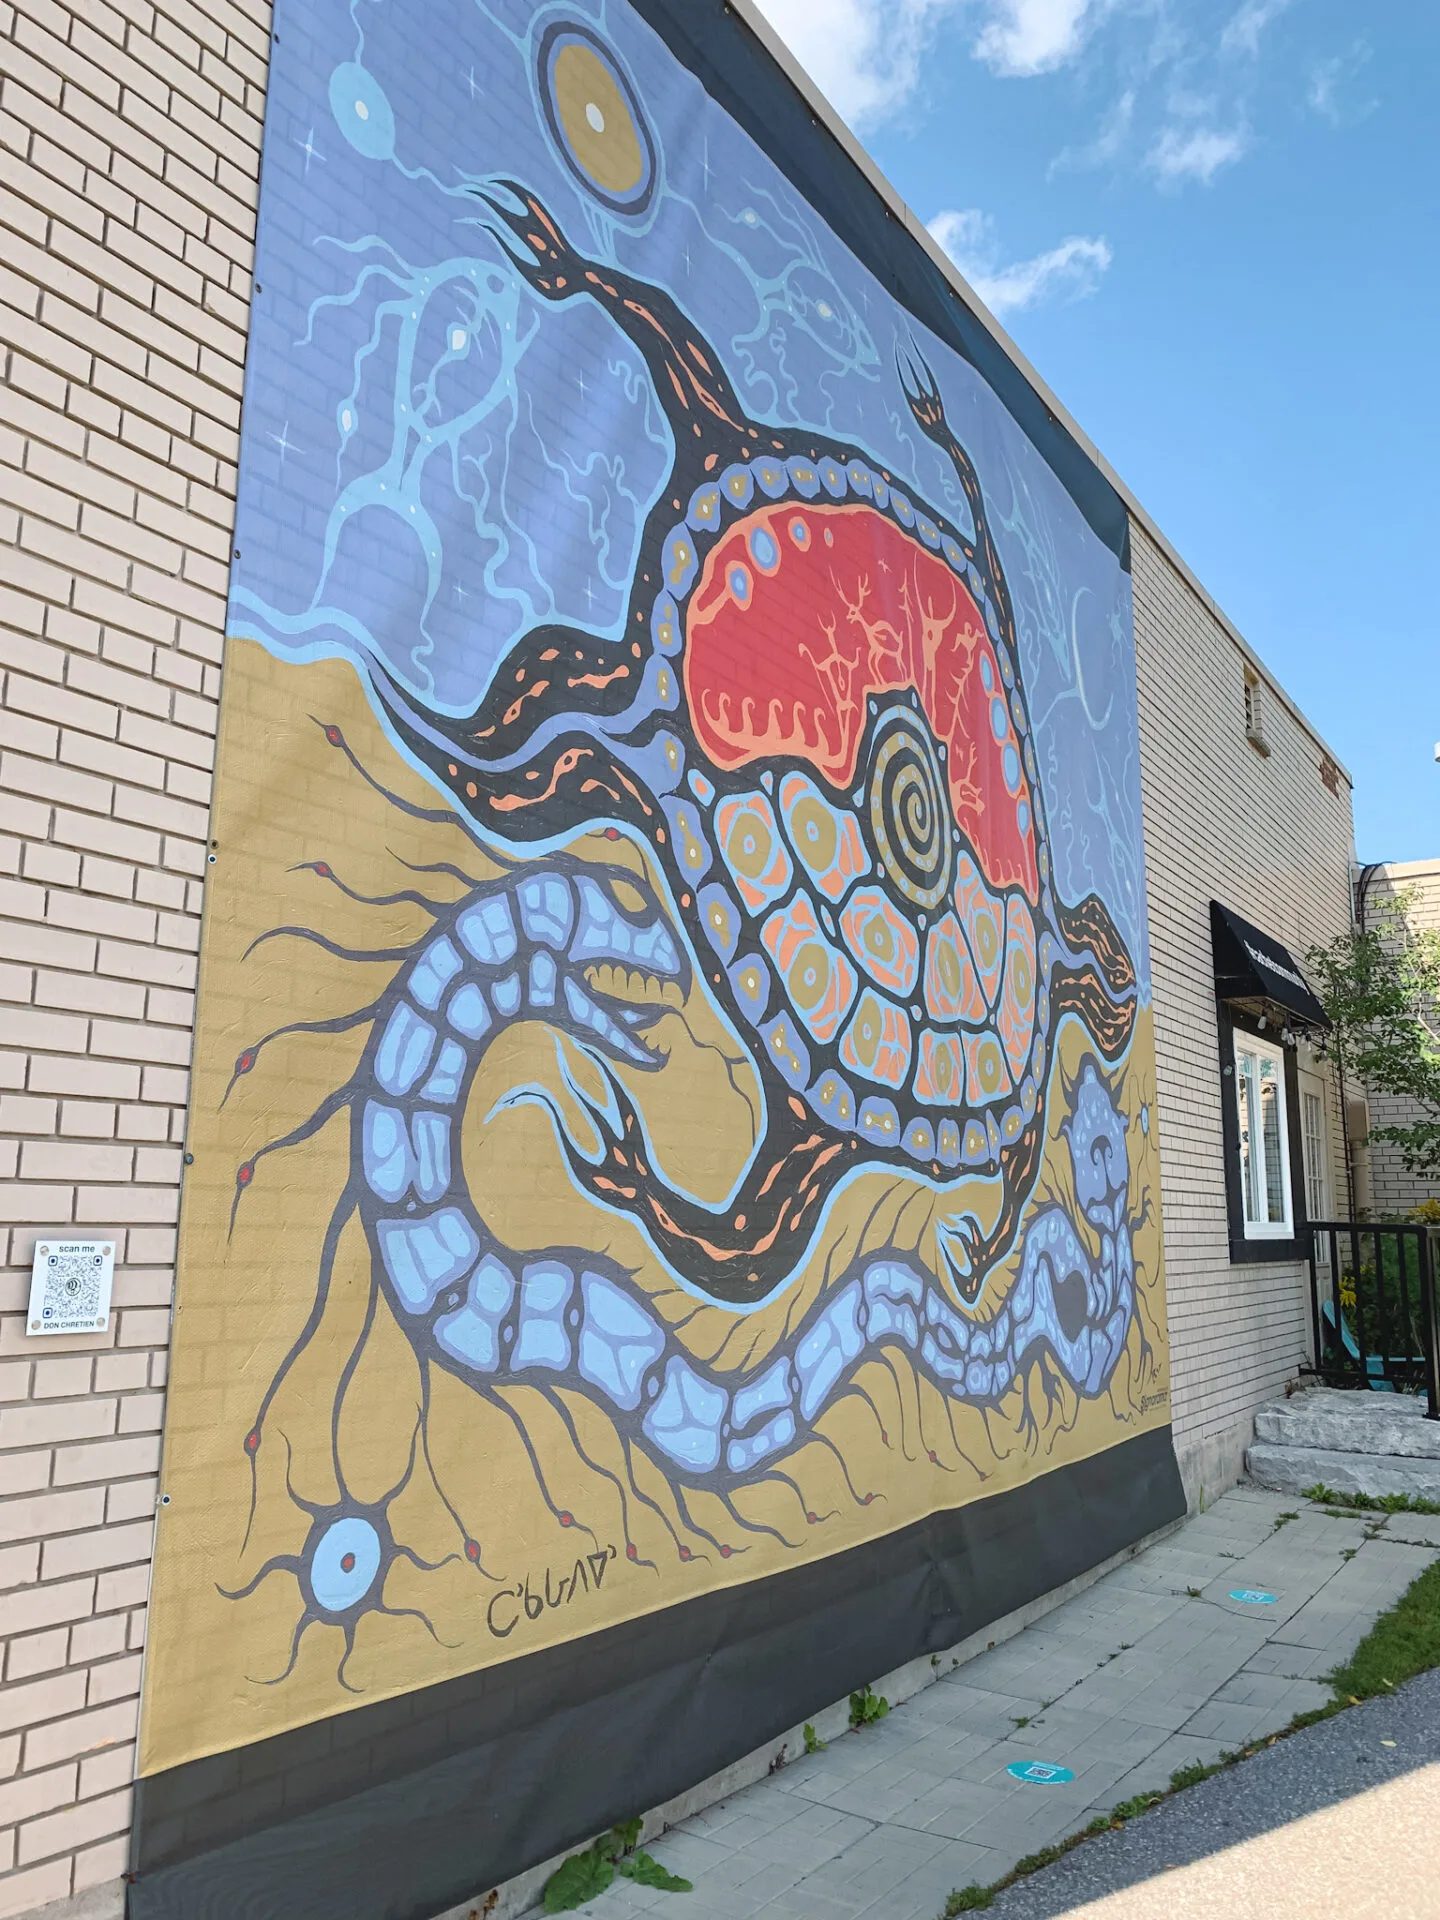 Mural by Donald Chretien in Newmarket, Ontario